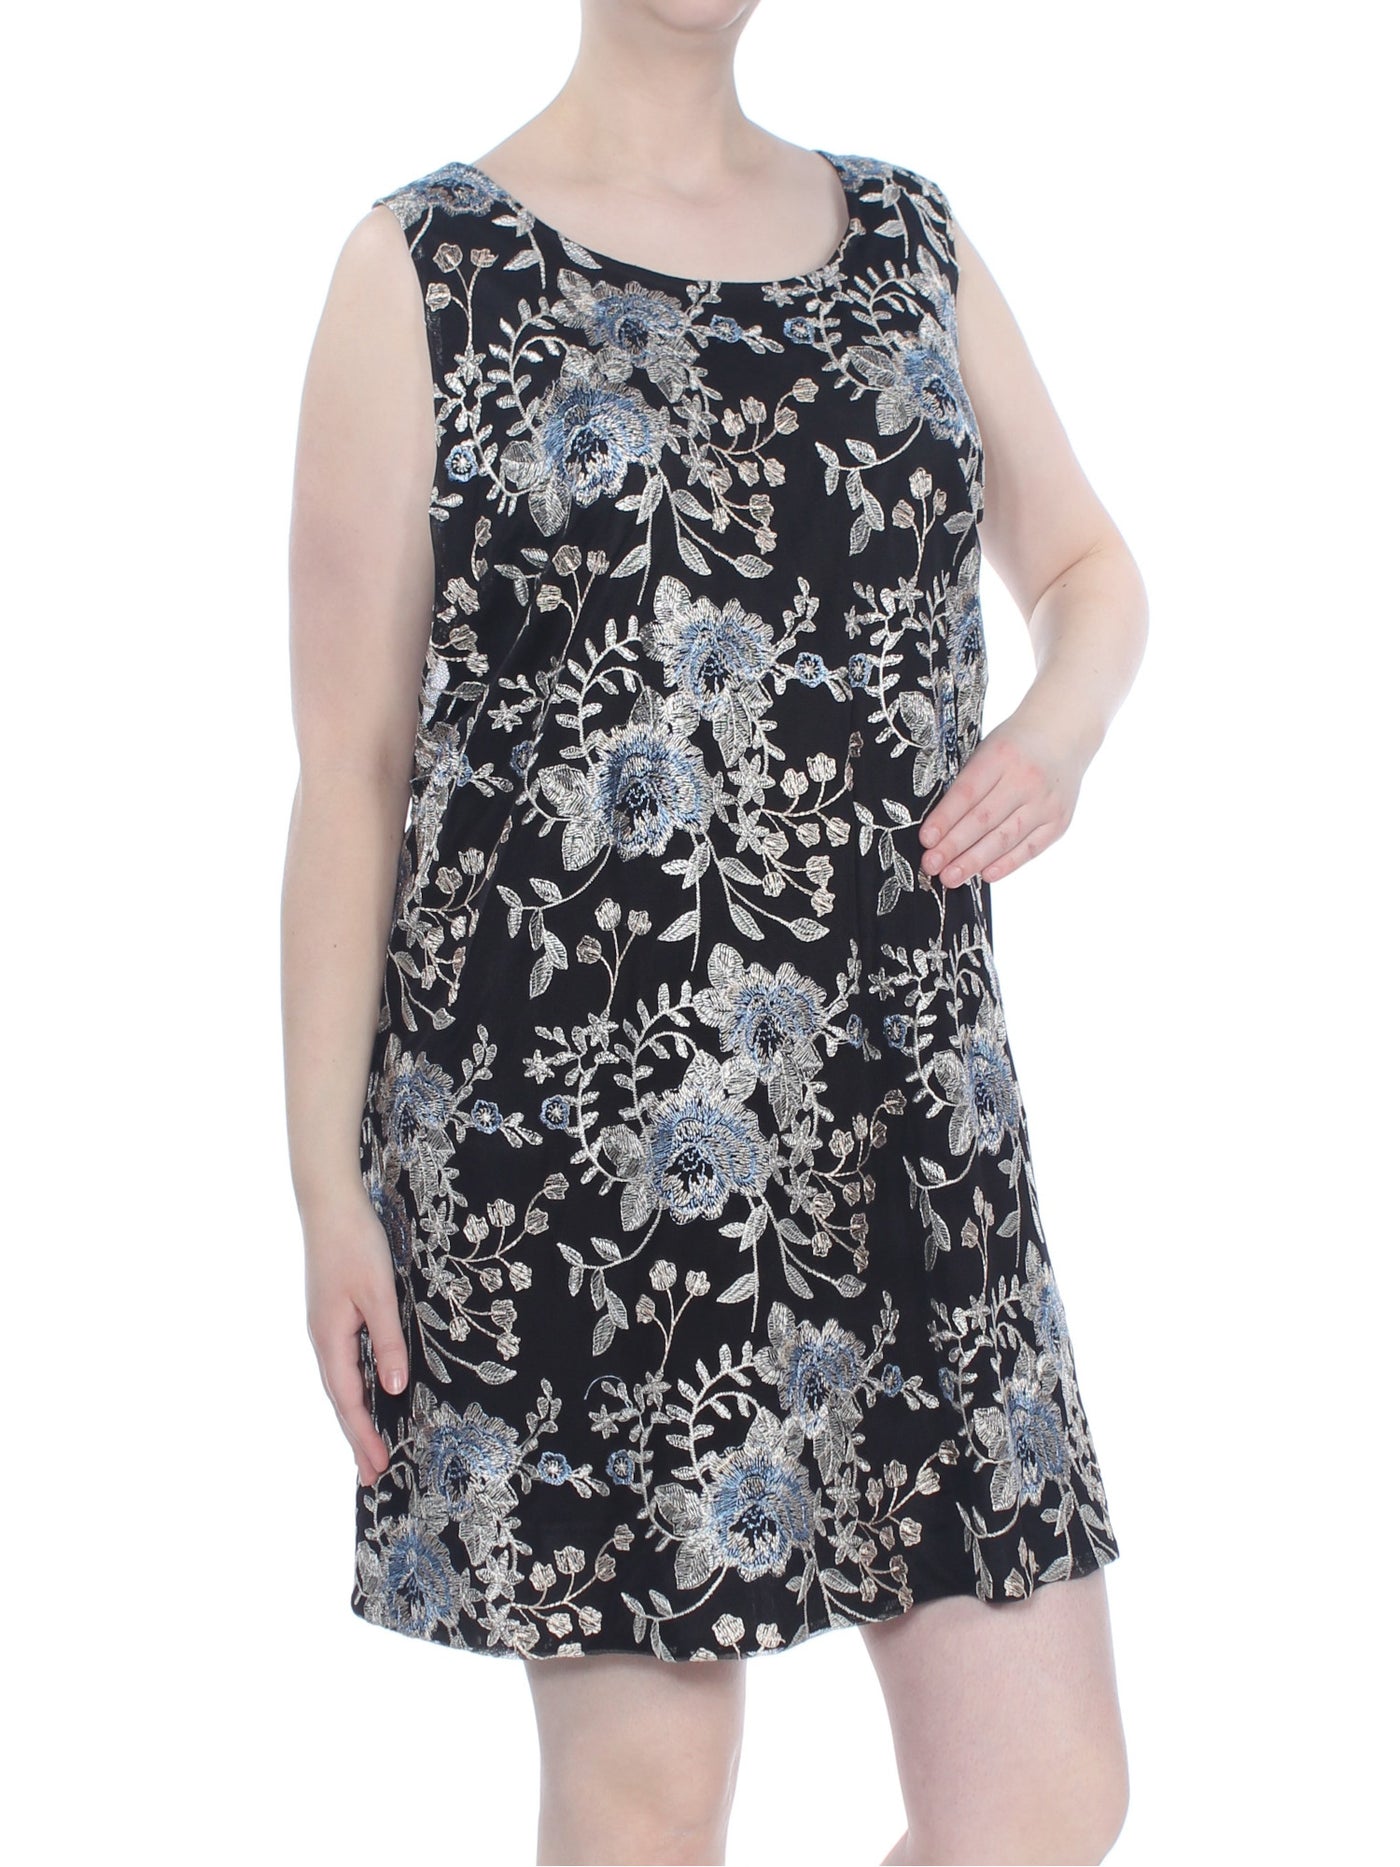 SIGNATURE BY ROBBIE BEE Womens Black Embroidered Floral Sleeveless Scoop Neck Above The Knee Trapeze Dress Plus 2X